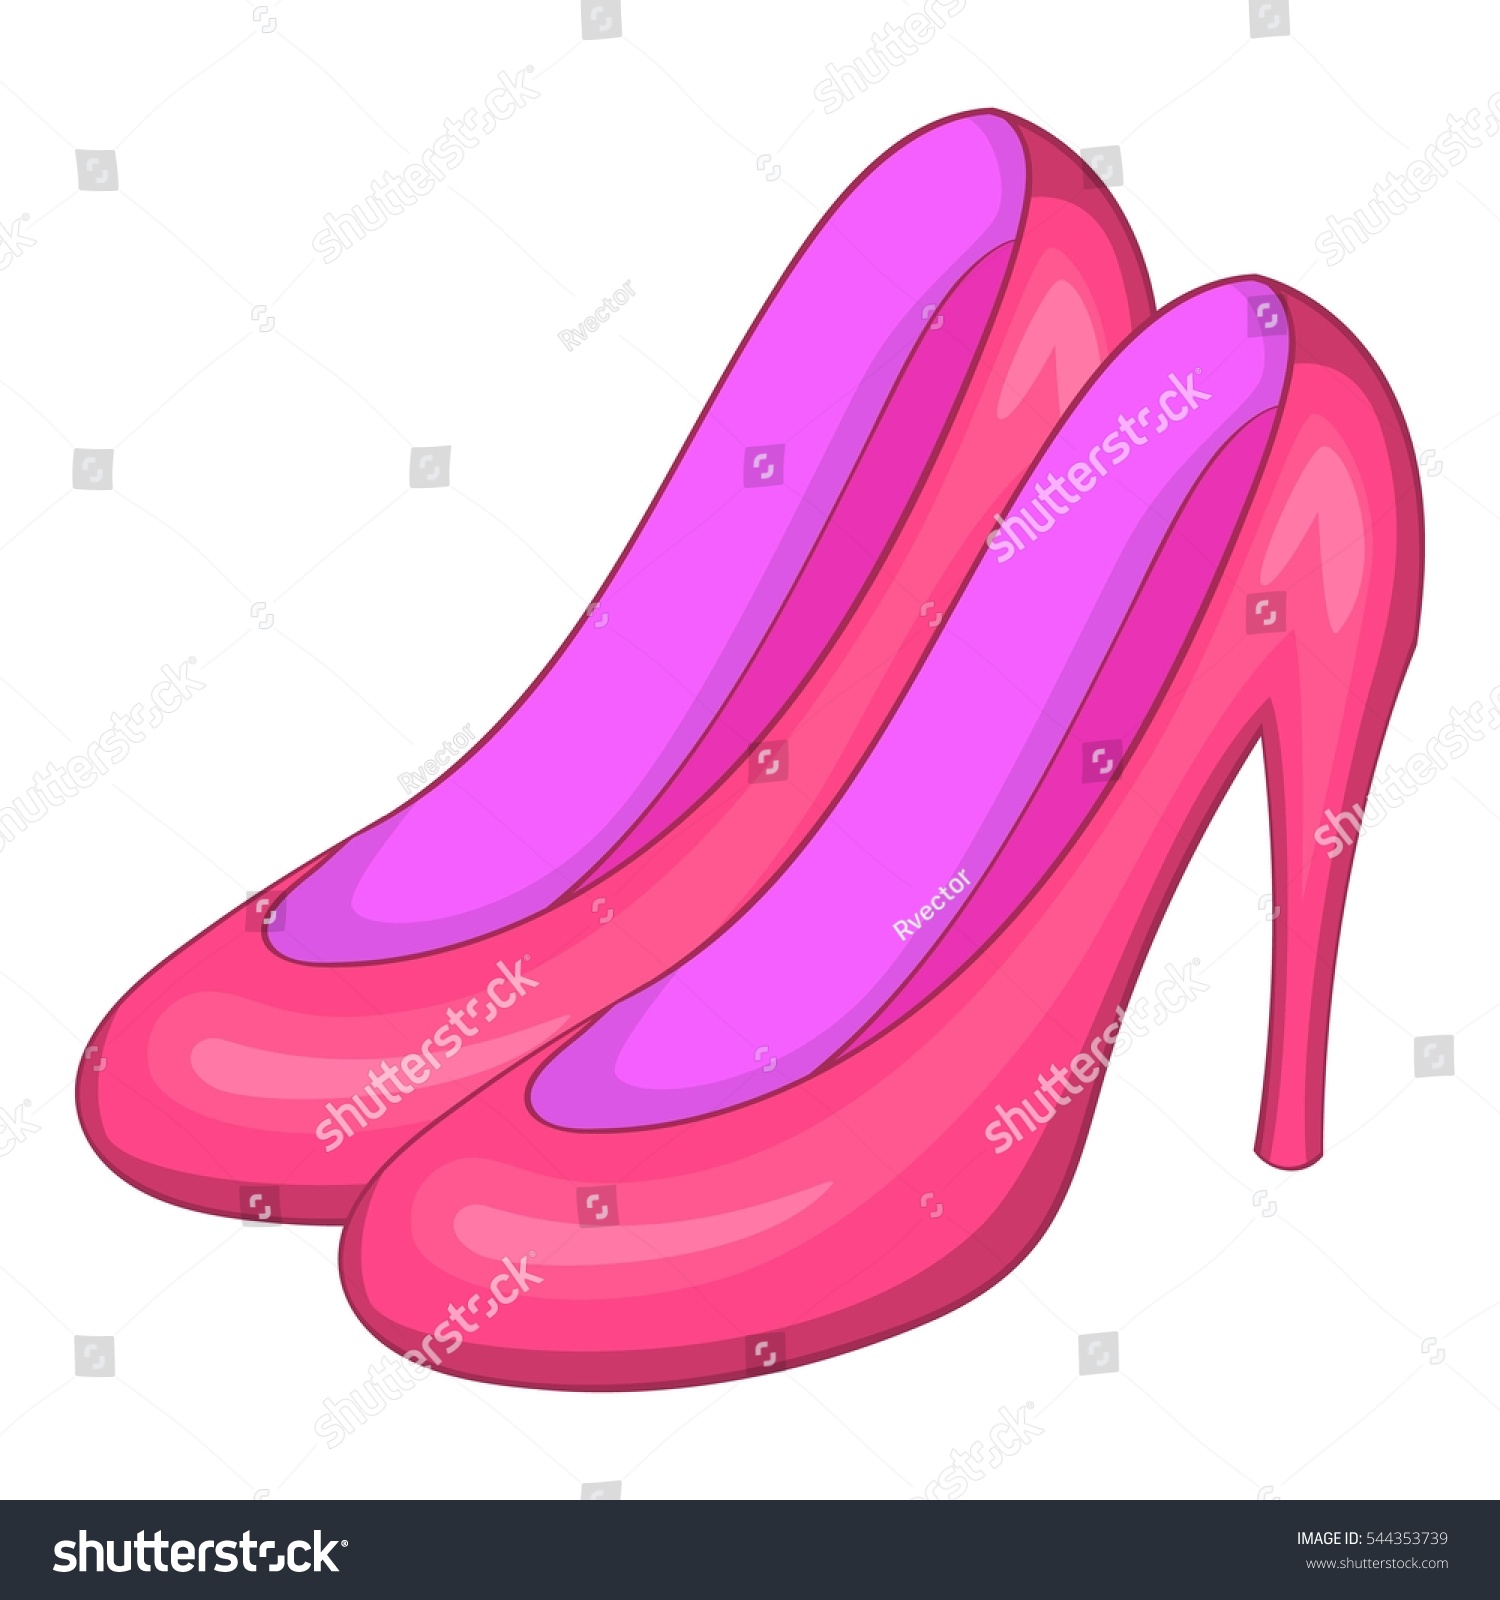 Pink Shoes Icon Cartoon Illustration Pink Stock Vector 544353739 ...